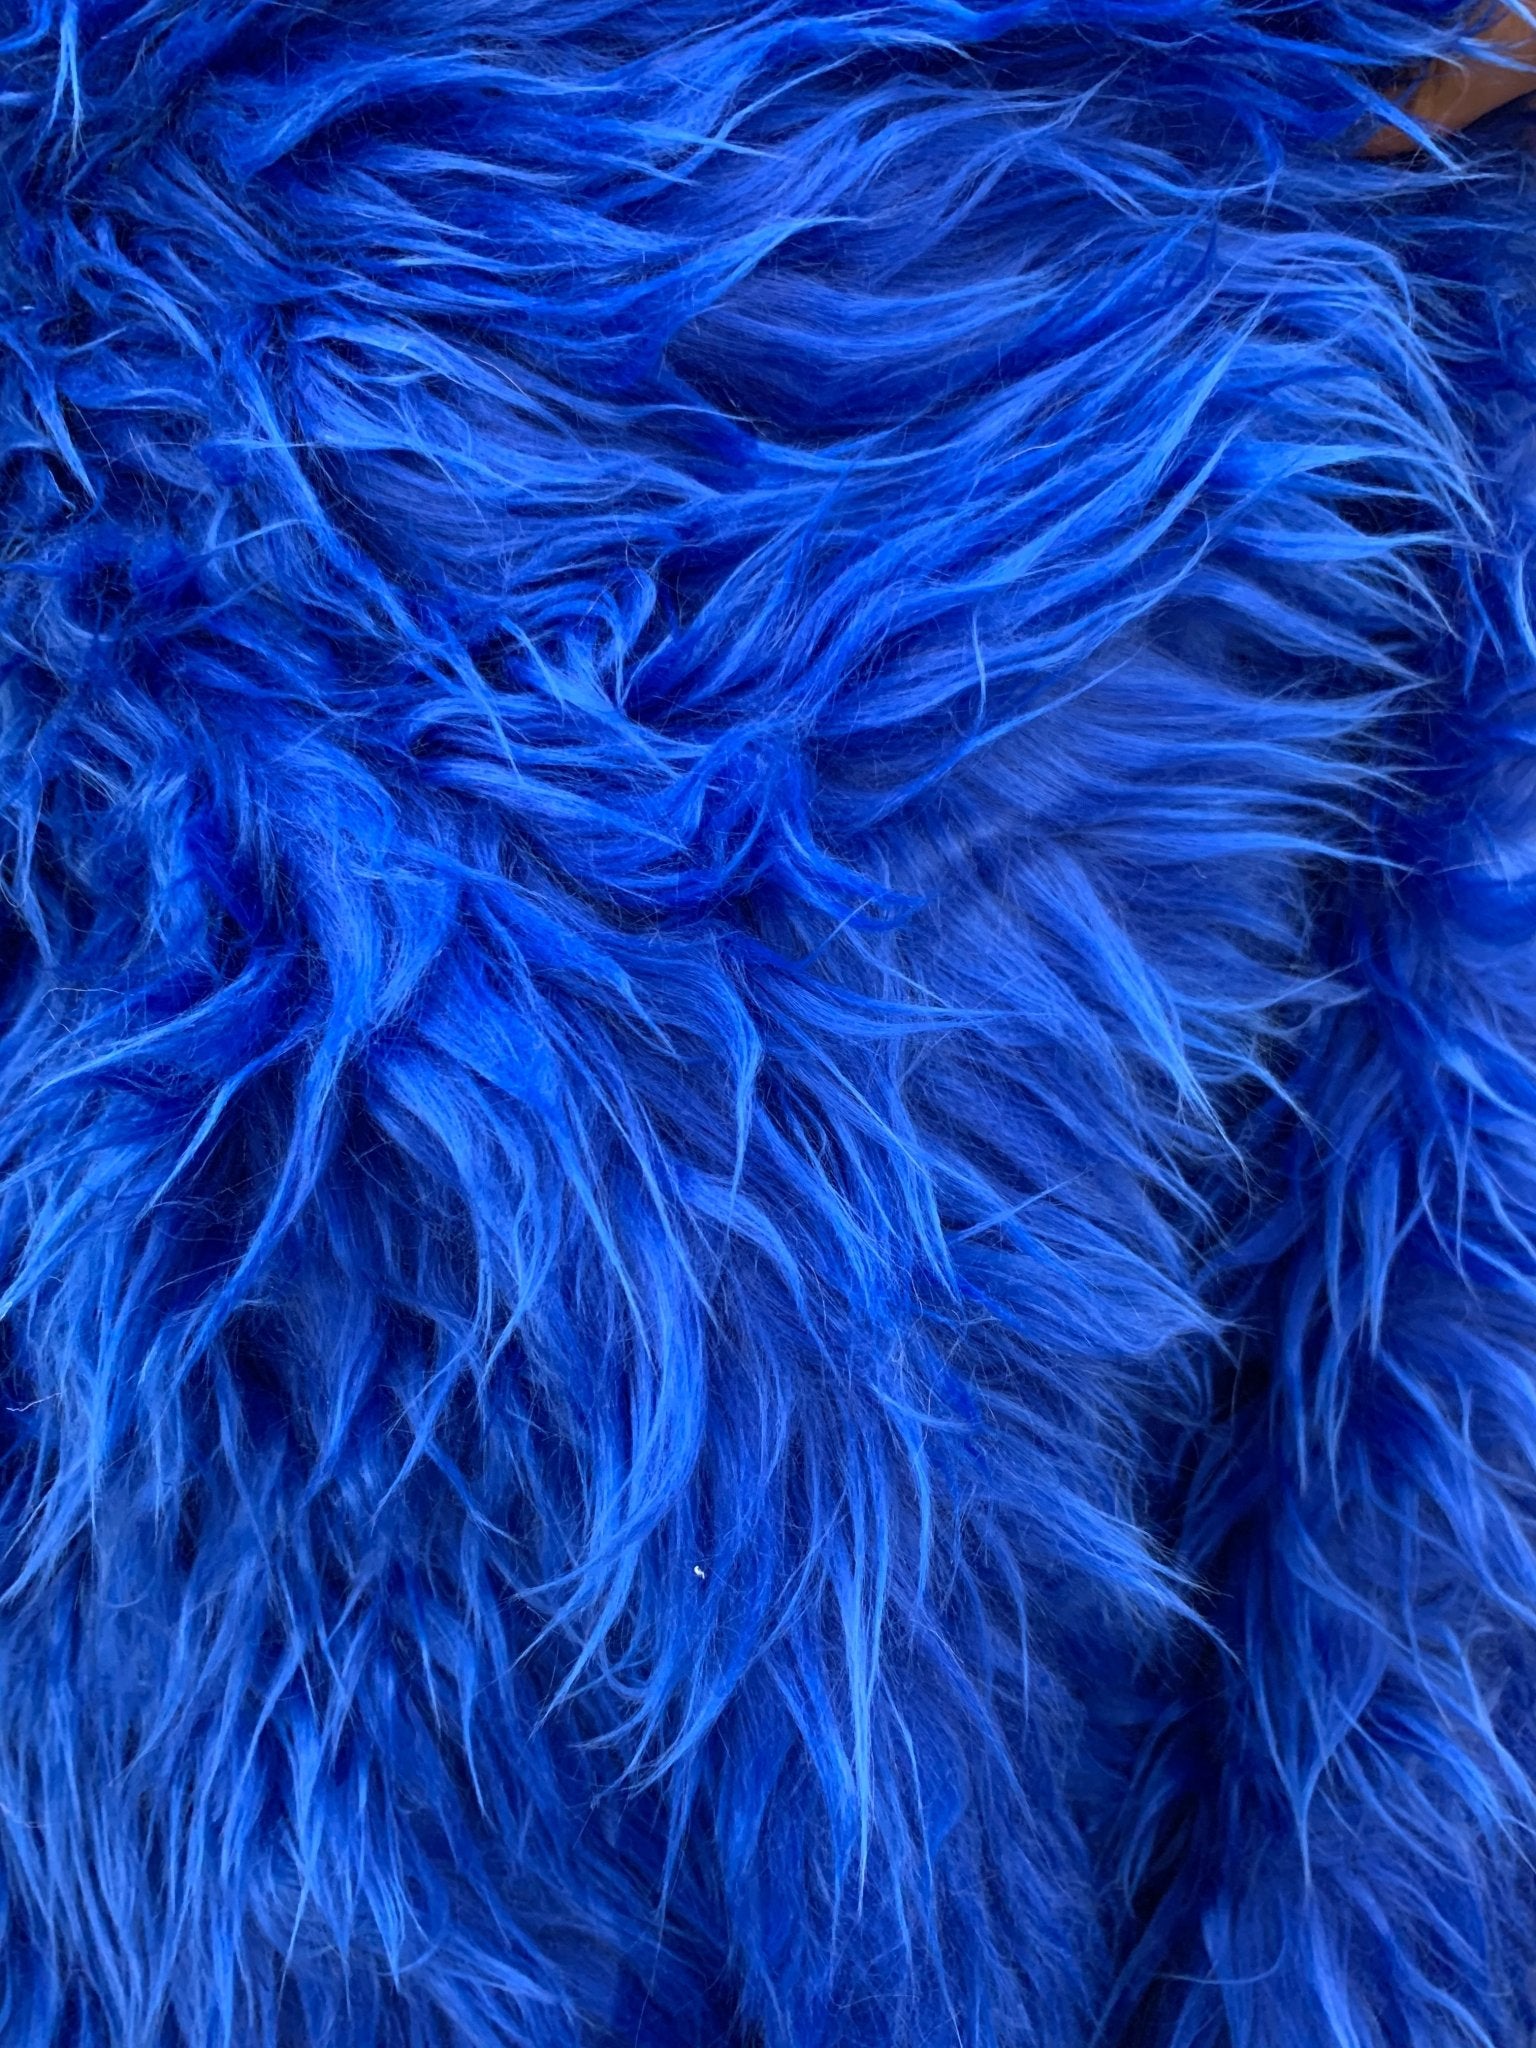 Mongolian Long Pile Fake Faux Fur Fabric Sold By The YardICEFABRICICE FABRICSRoyal BlueBy The Yard (60 inches Wide)Mongolian Long Pile Fake Faux Fur Fabric Sold By The Yard ICEFABRIC